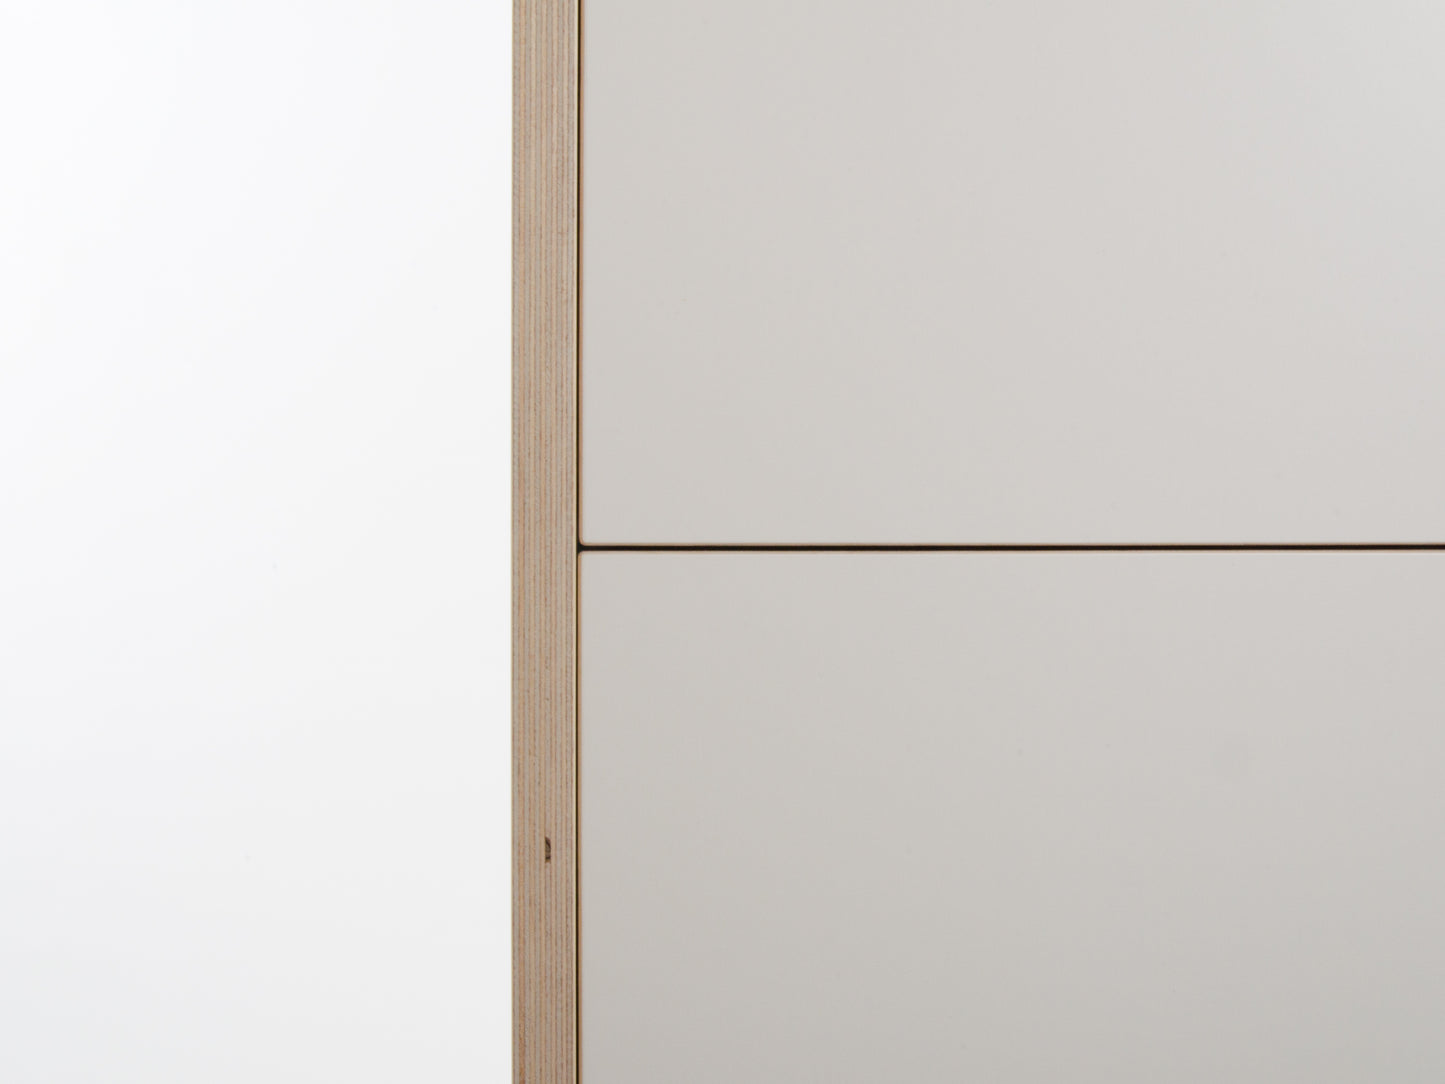 Malmo (White) Chest of Drawers